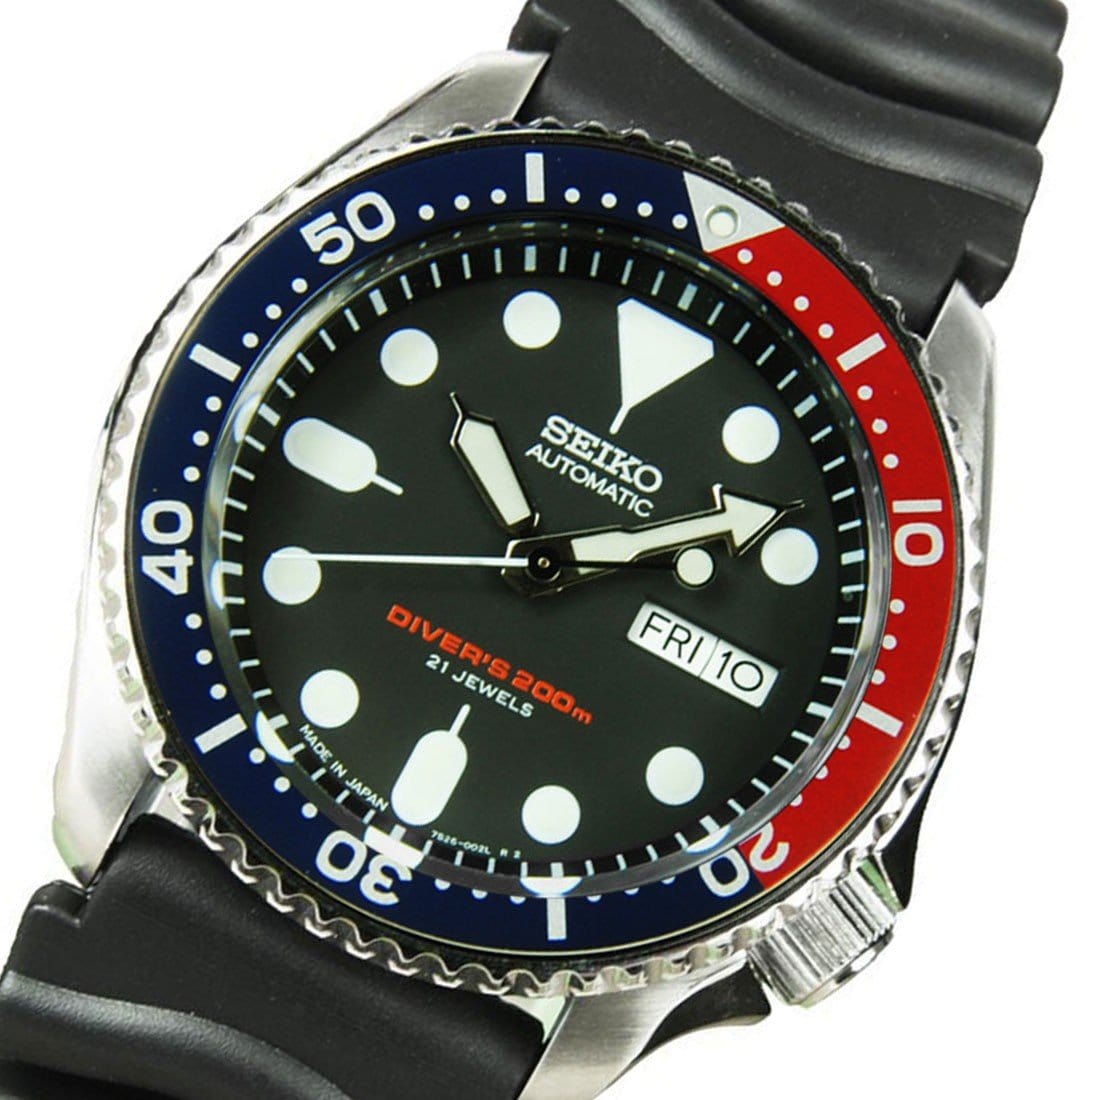 SKX009J SKX009J1 Seiko Automatic Analog Male Divers Watch + Extra Leather Rubber Strap